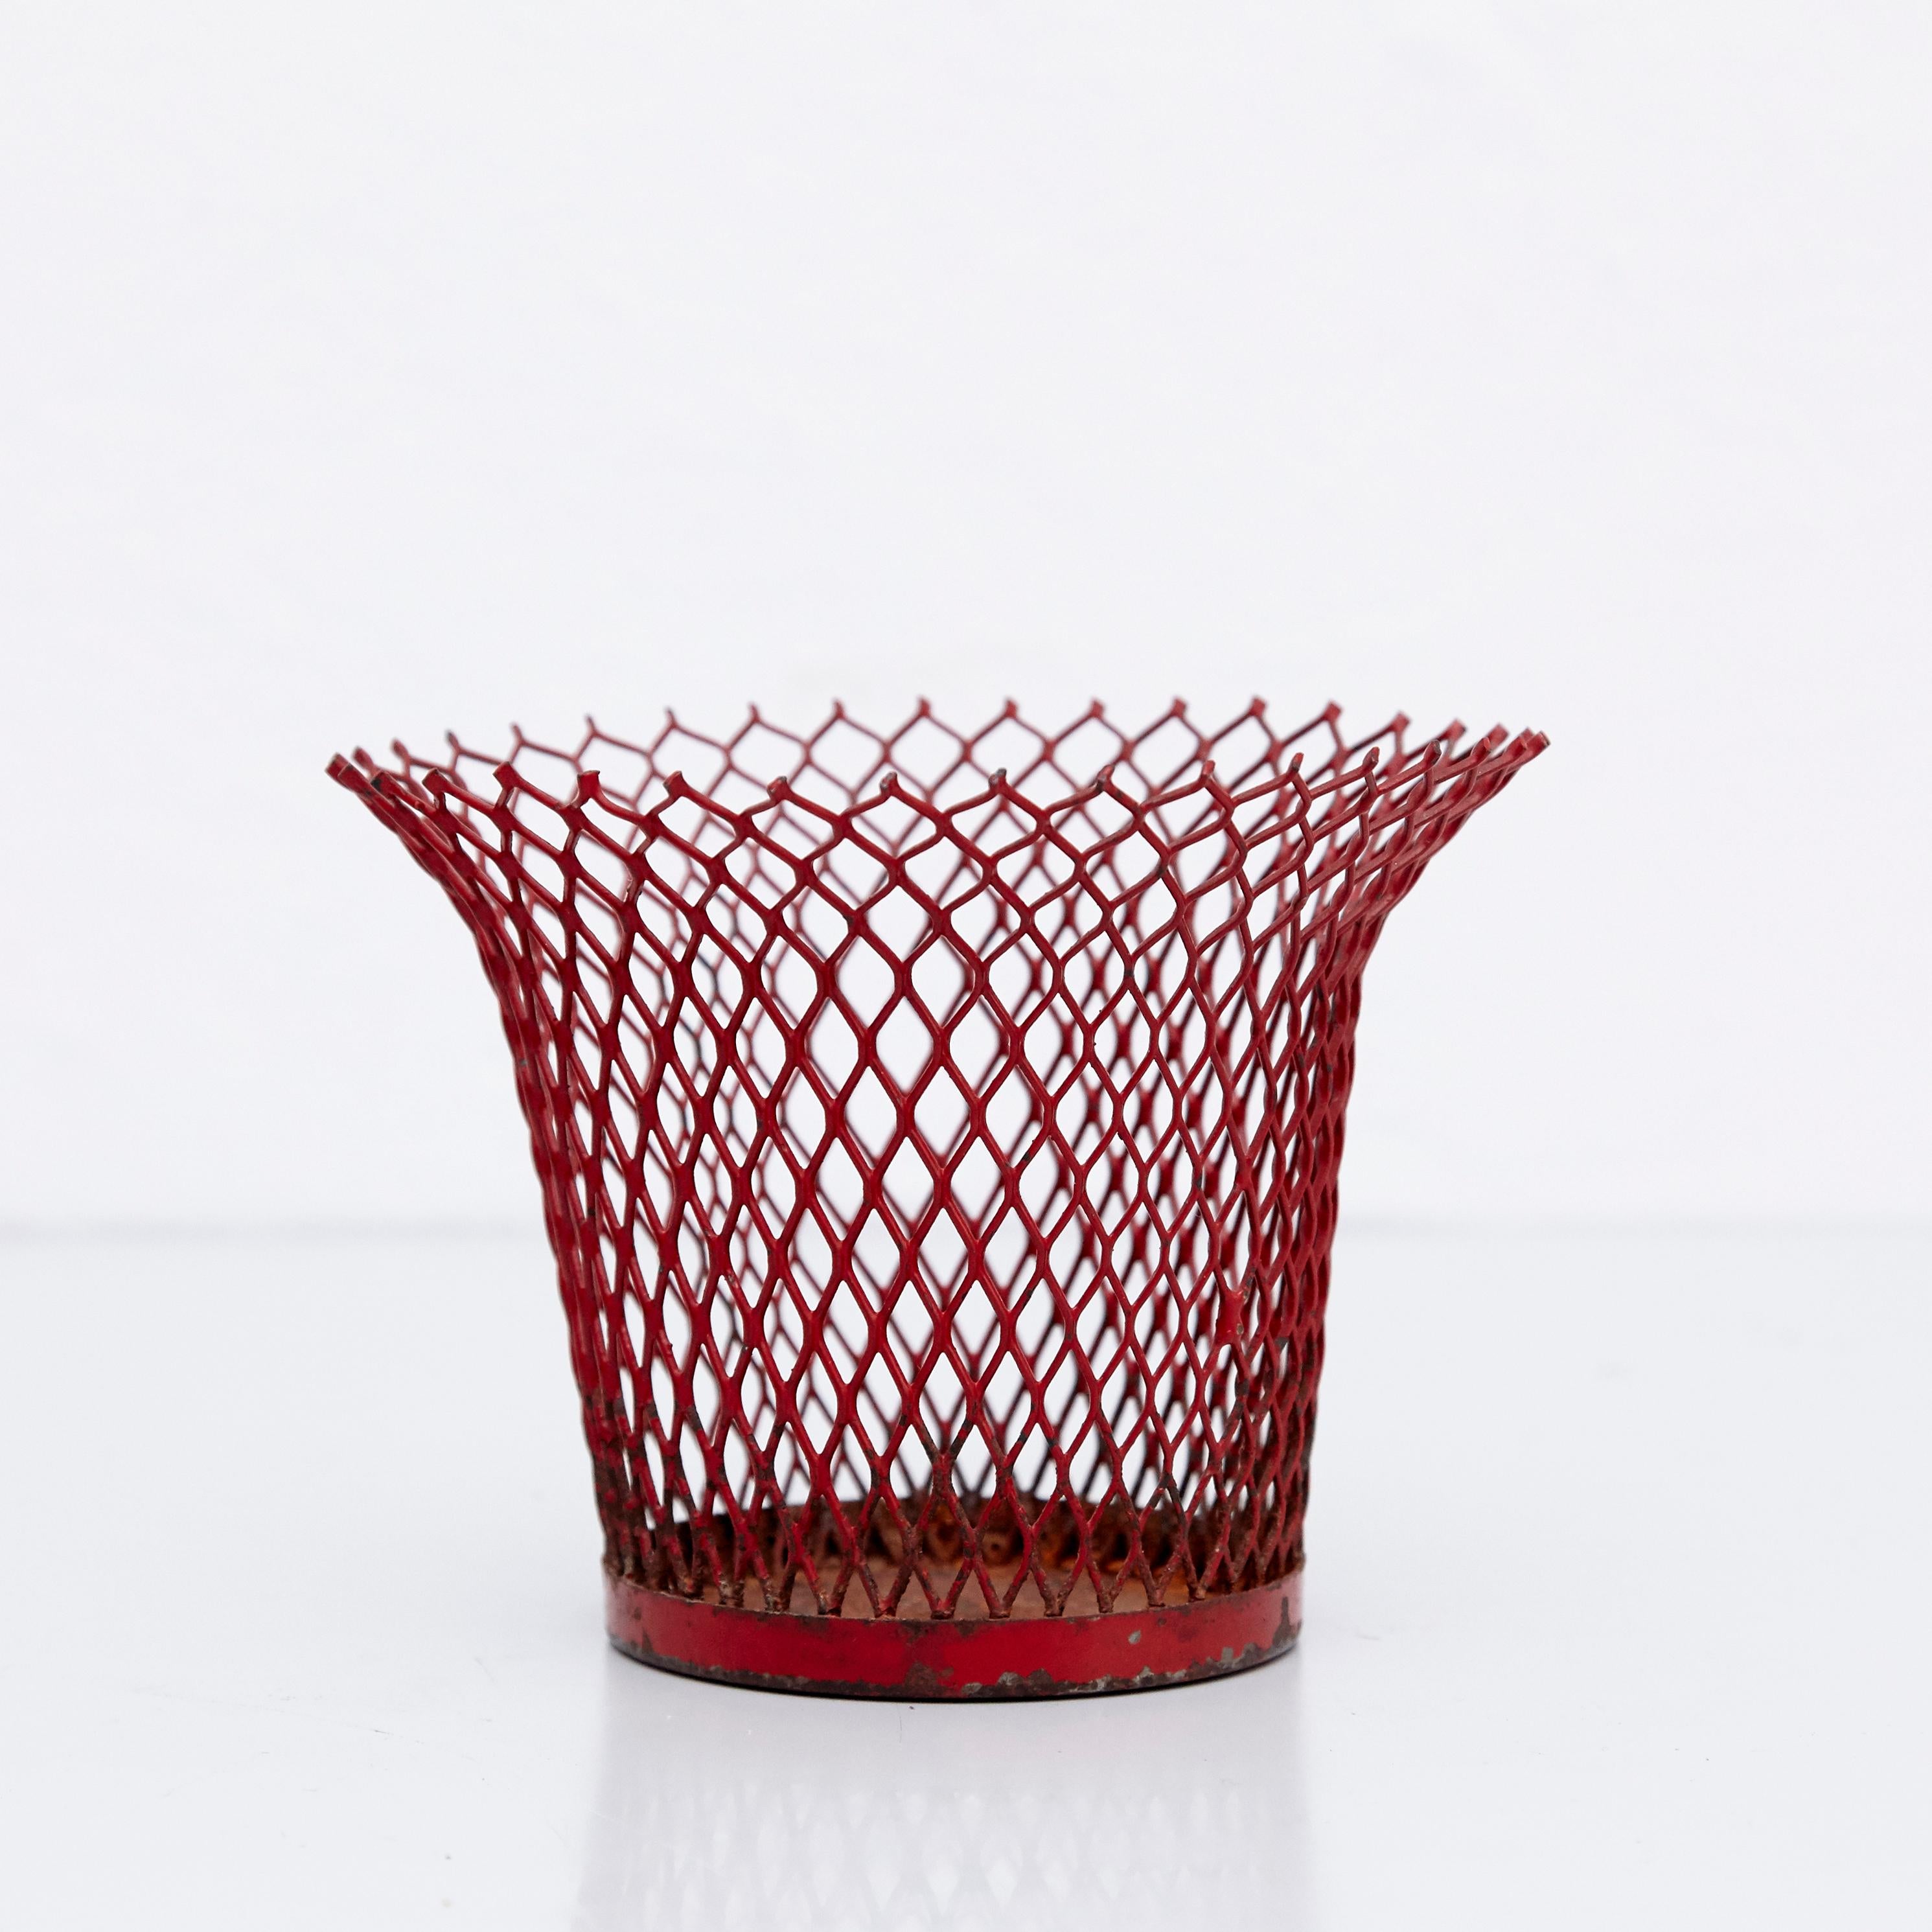 Enameled metal baskets designed by Mathieu Matégot.
Manufactured by Ateliers Mategot (France,) circa 1950.
Lacquered perforated metal, it has some traces of rust.

In original condition, with wear consistent with age and use, preserving a